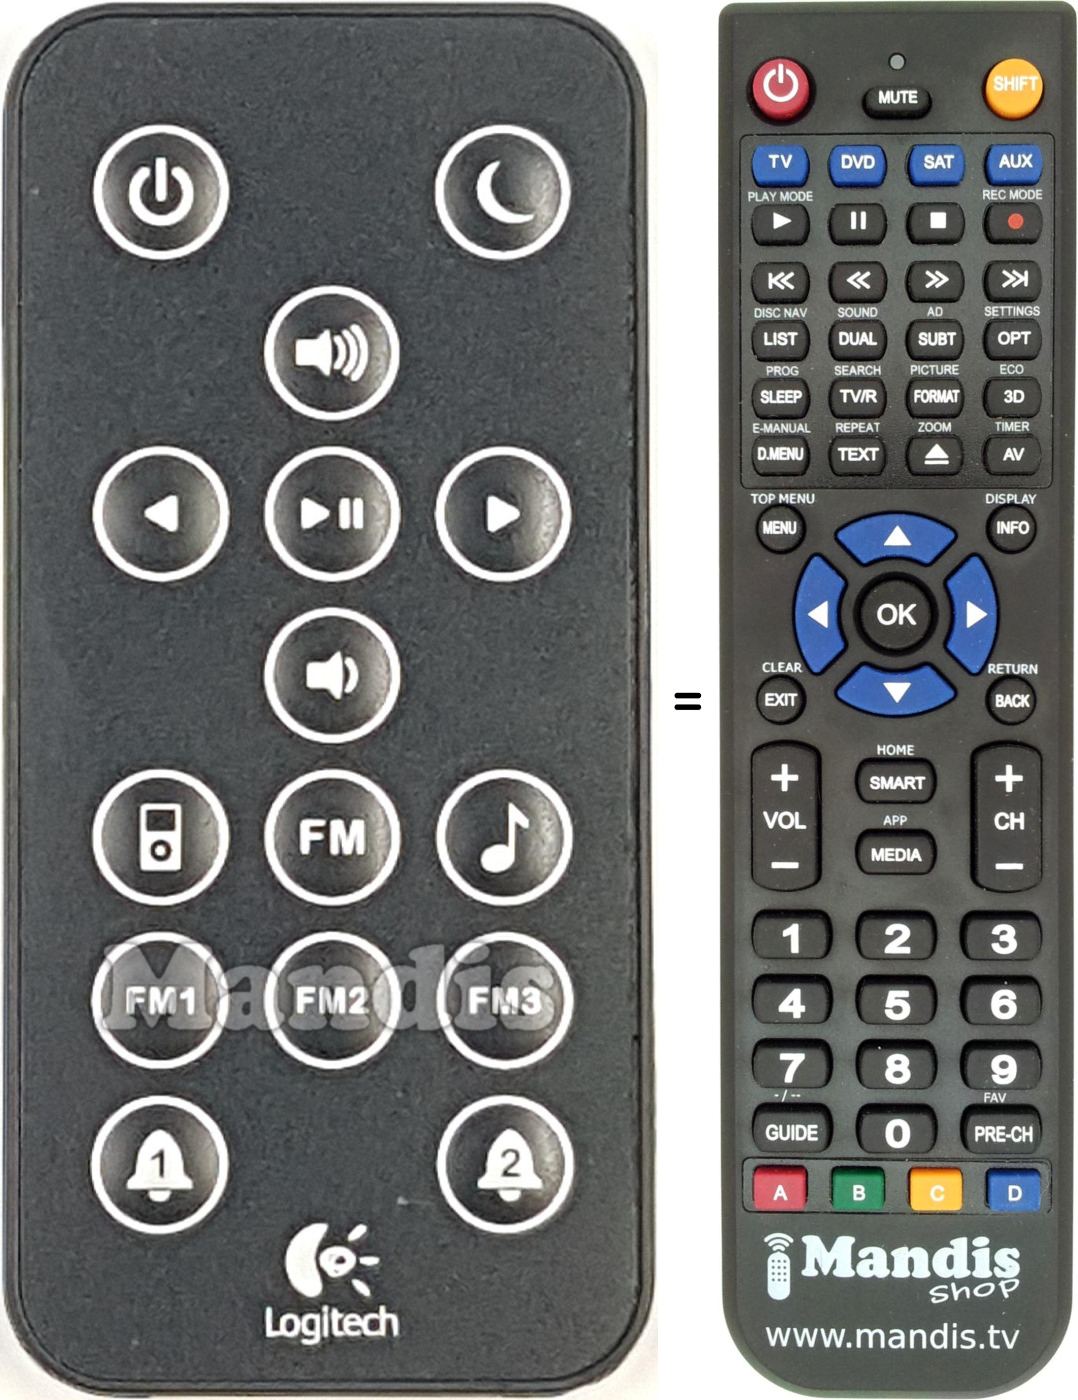 Replacement remote control S400I